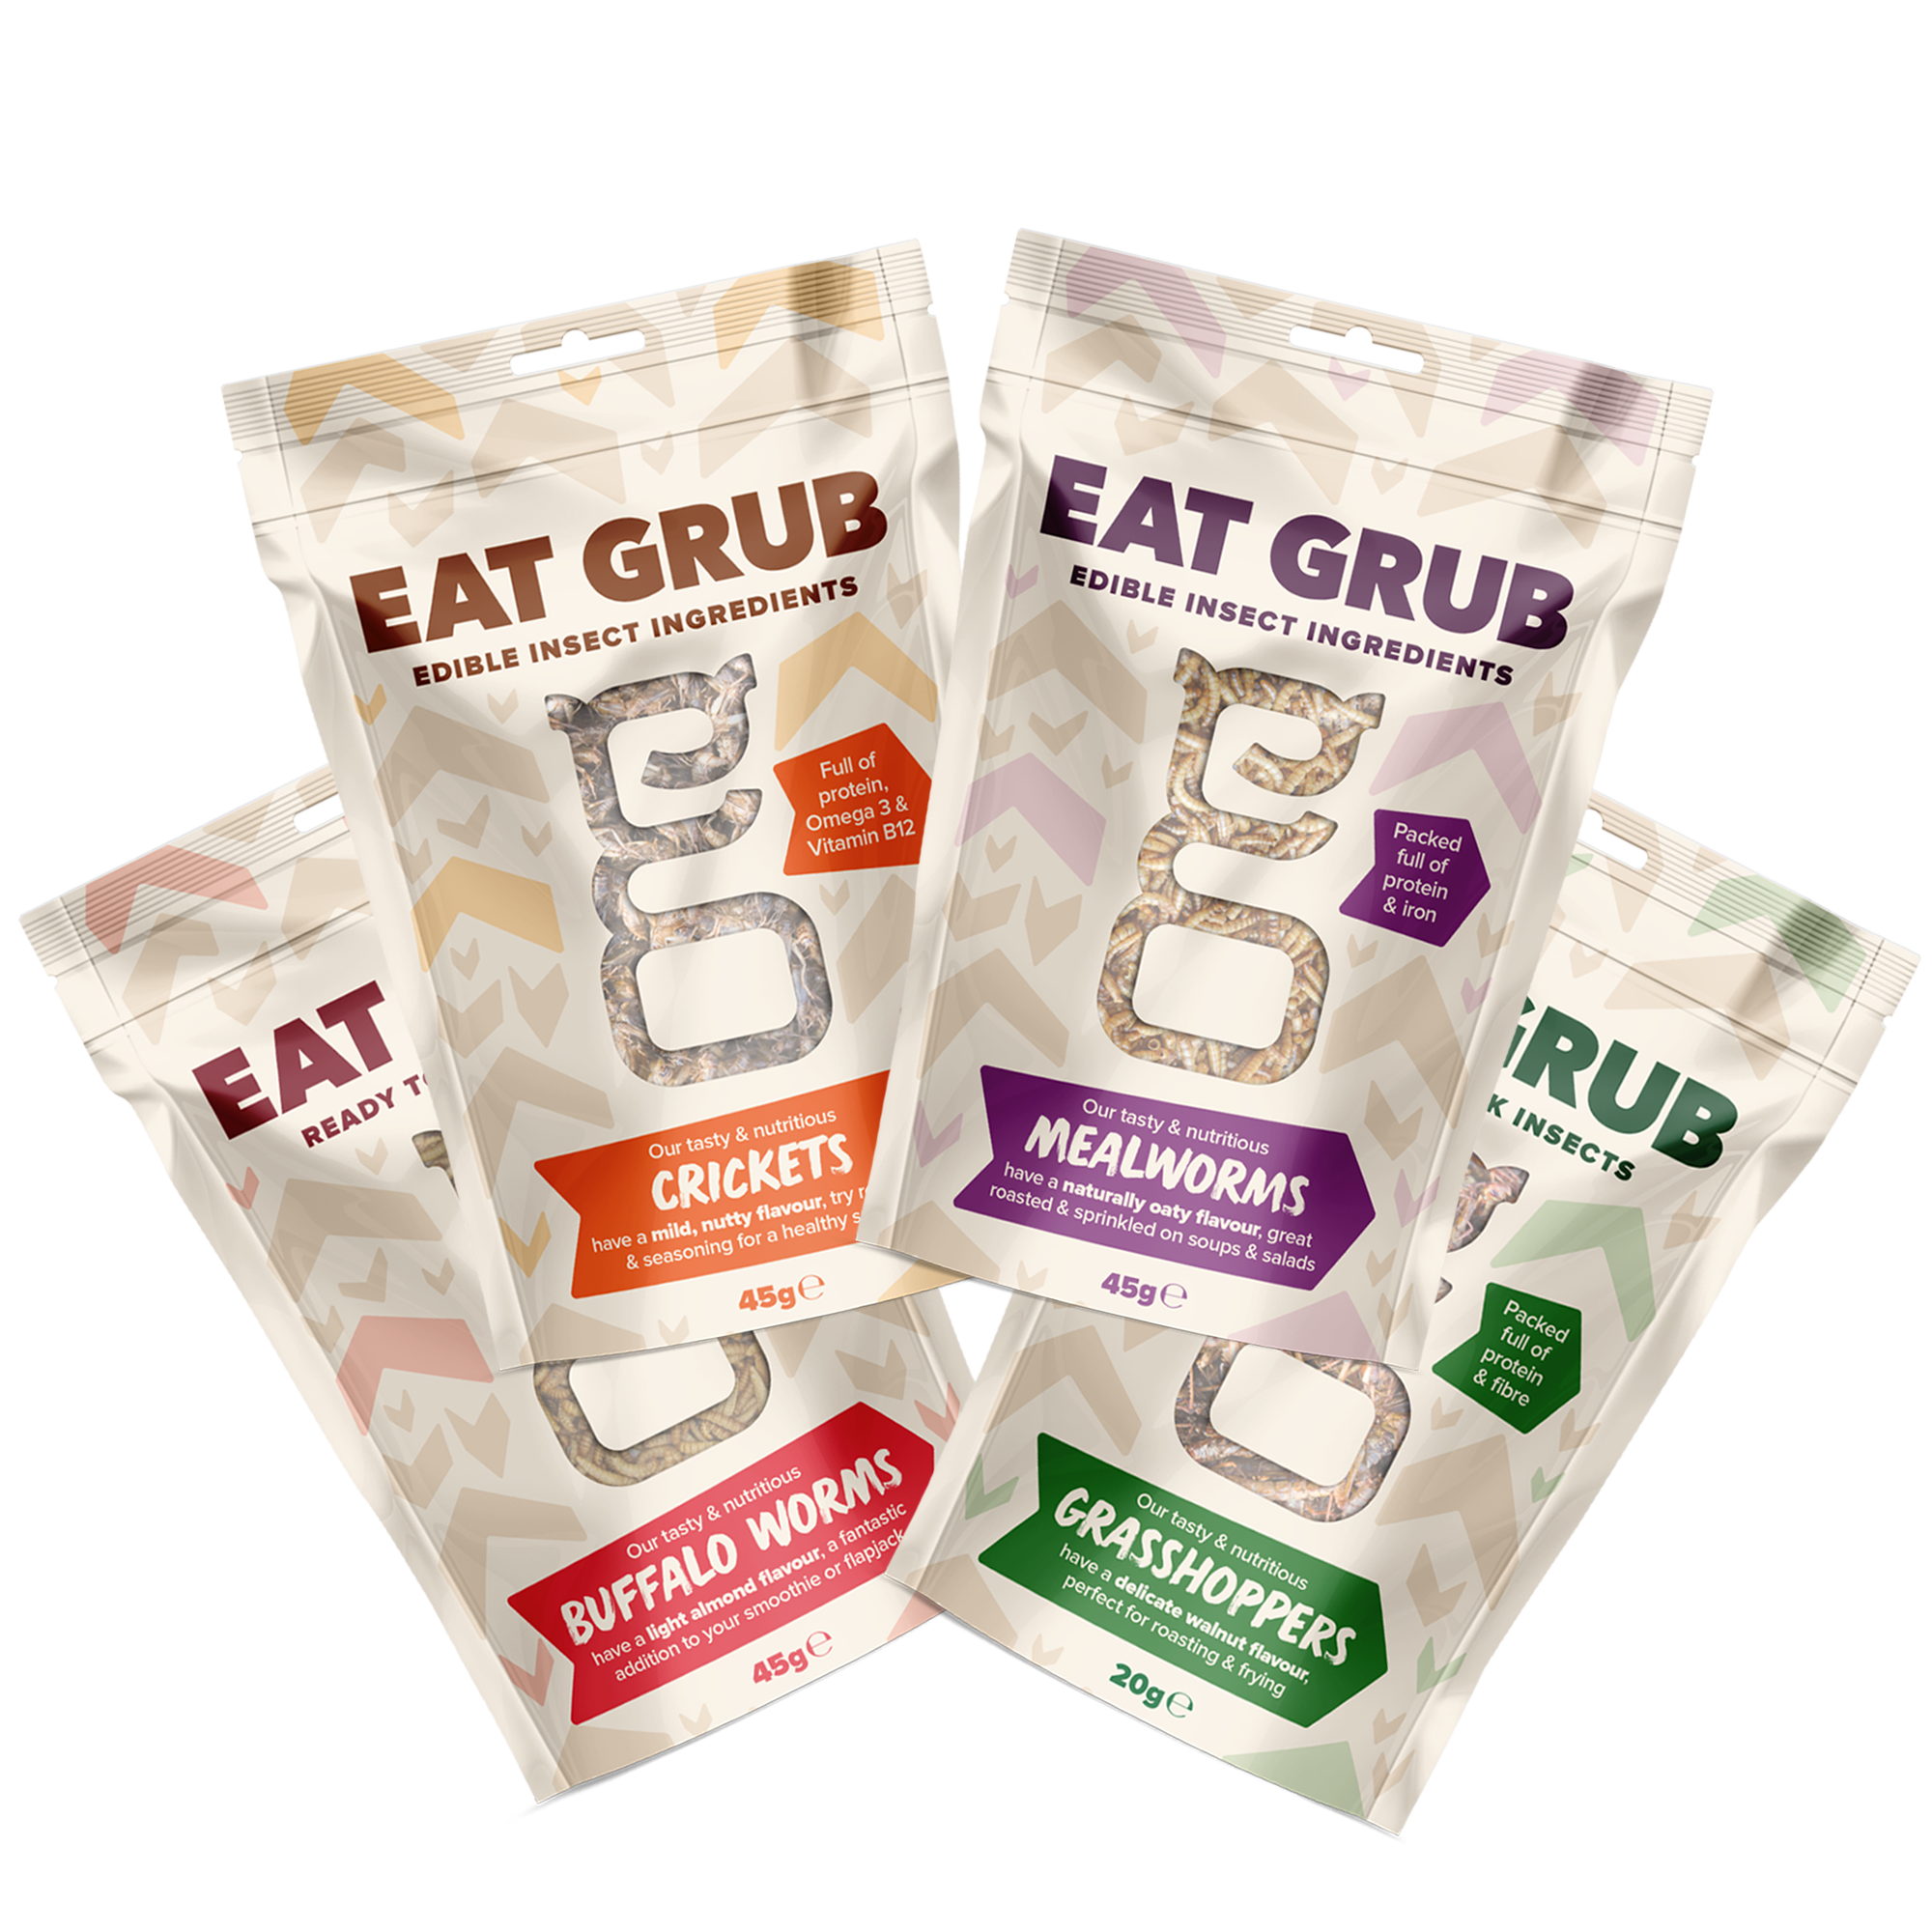 Eat Grub Starter Pack - Grasshoppers, Crickets, Mealworms, Buffalo Worms